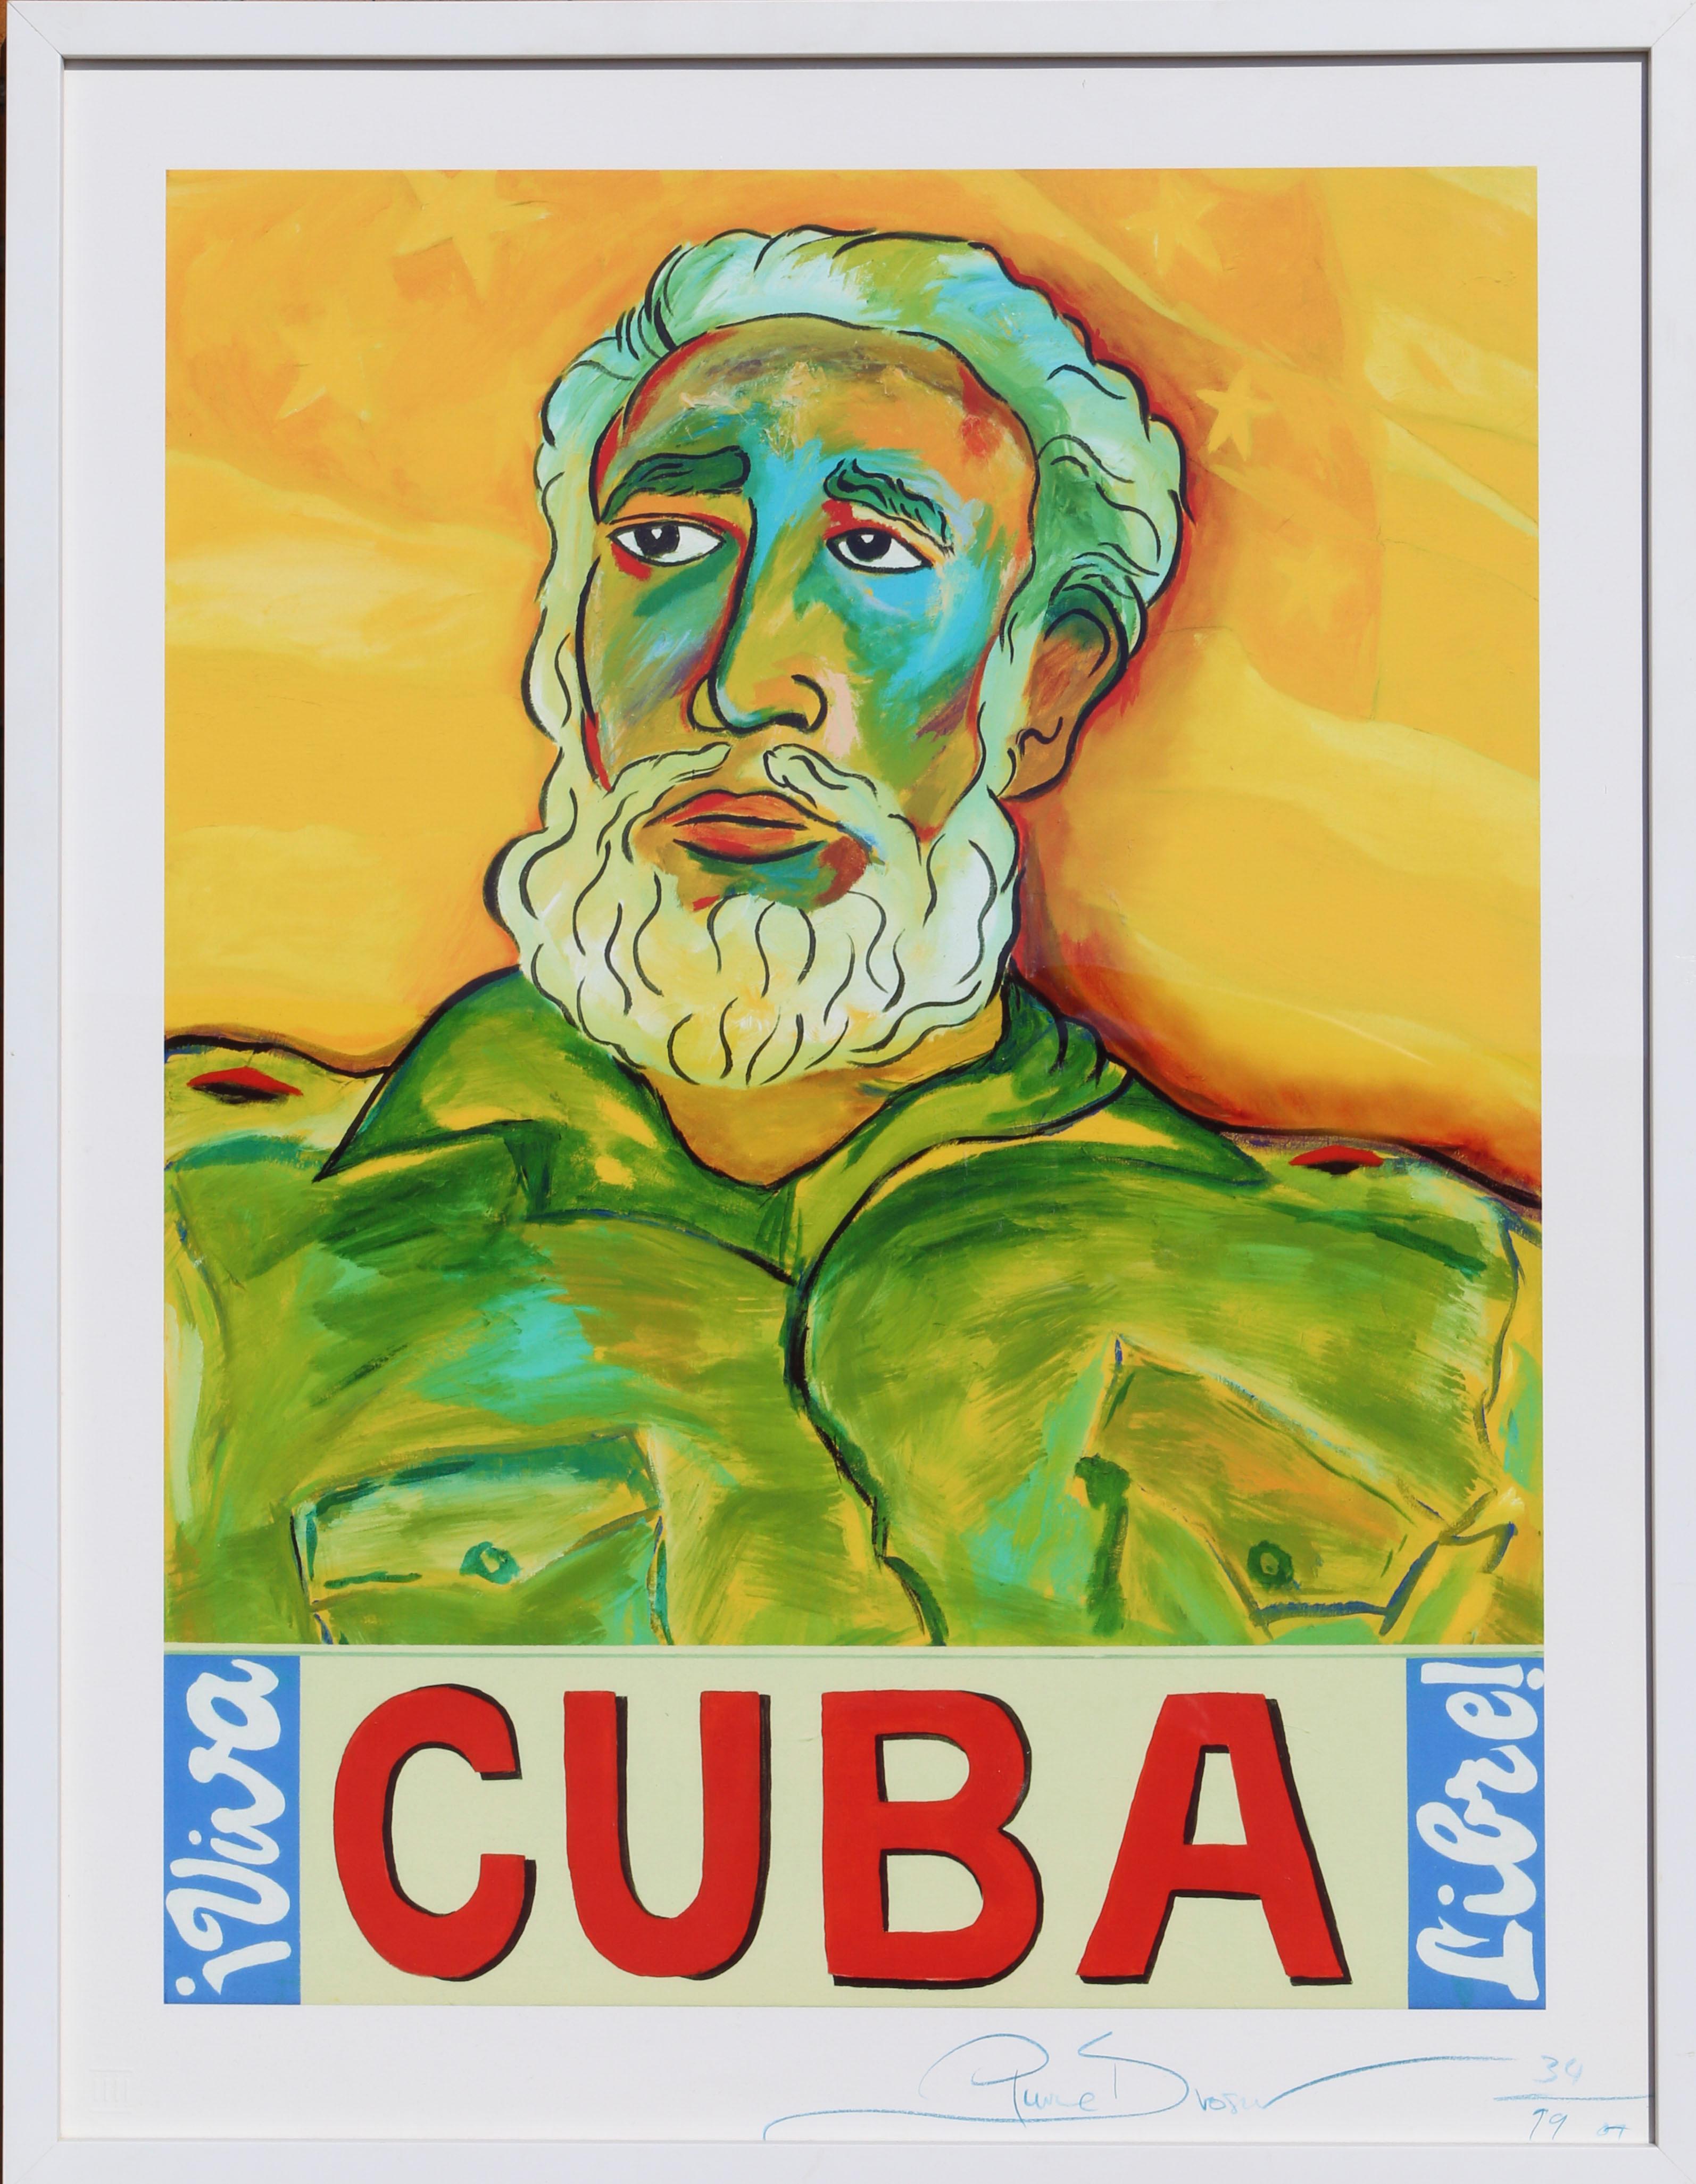 "Castro was on the cover of 'Cigar Aficionado'. I painted his head and torso really fast, and it stayed like that for nearly 2 years until Keely fell in love with it. Then later we traveled to Cuba, and one day she stood by this wall that was 25